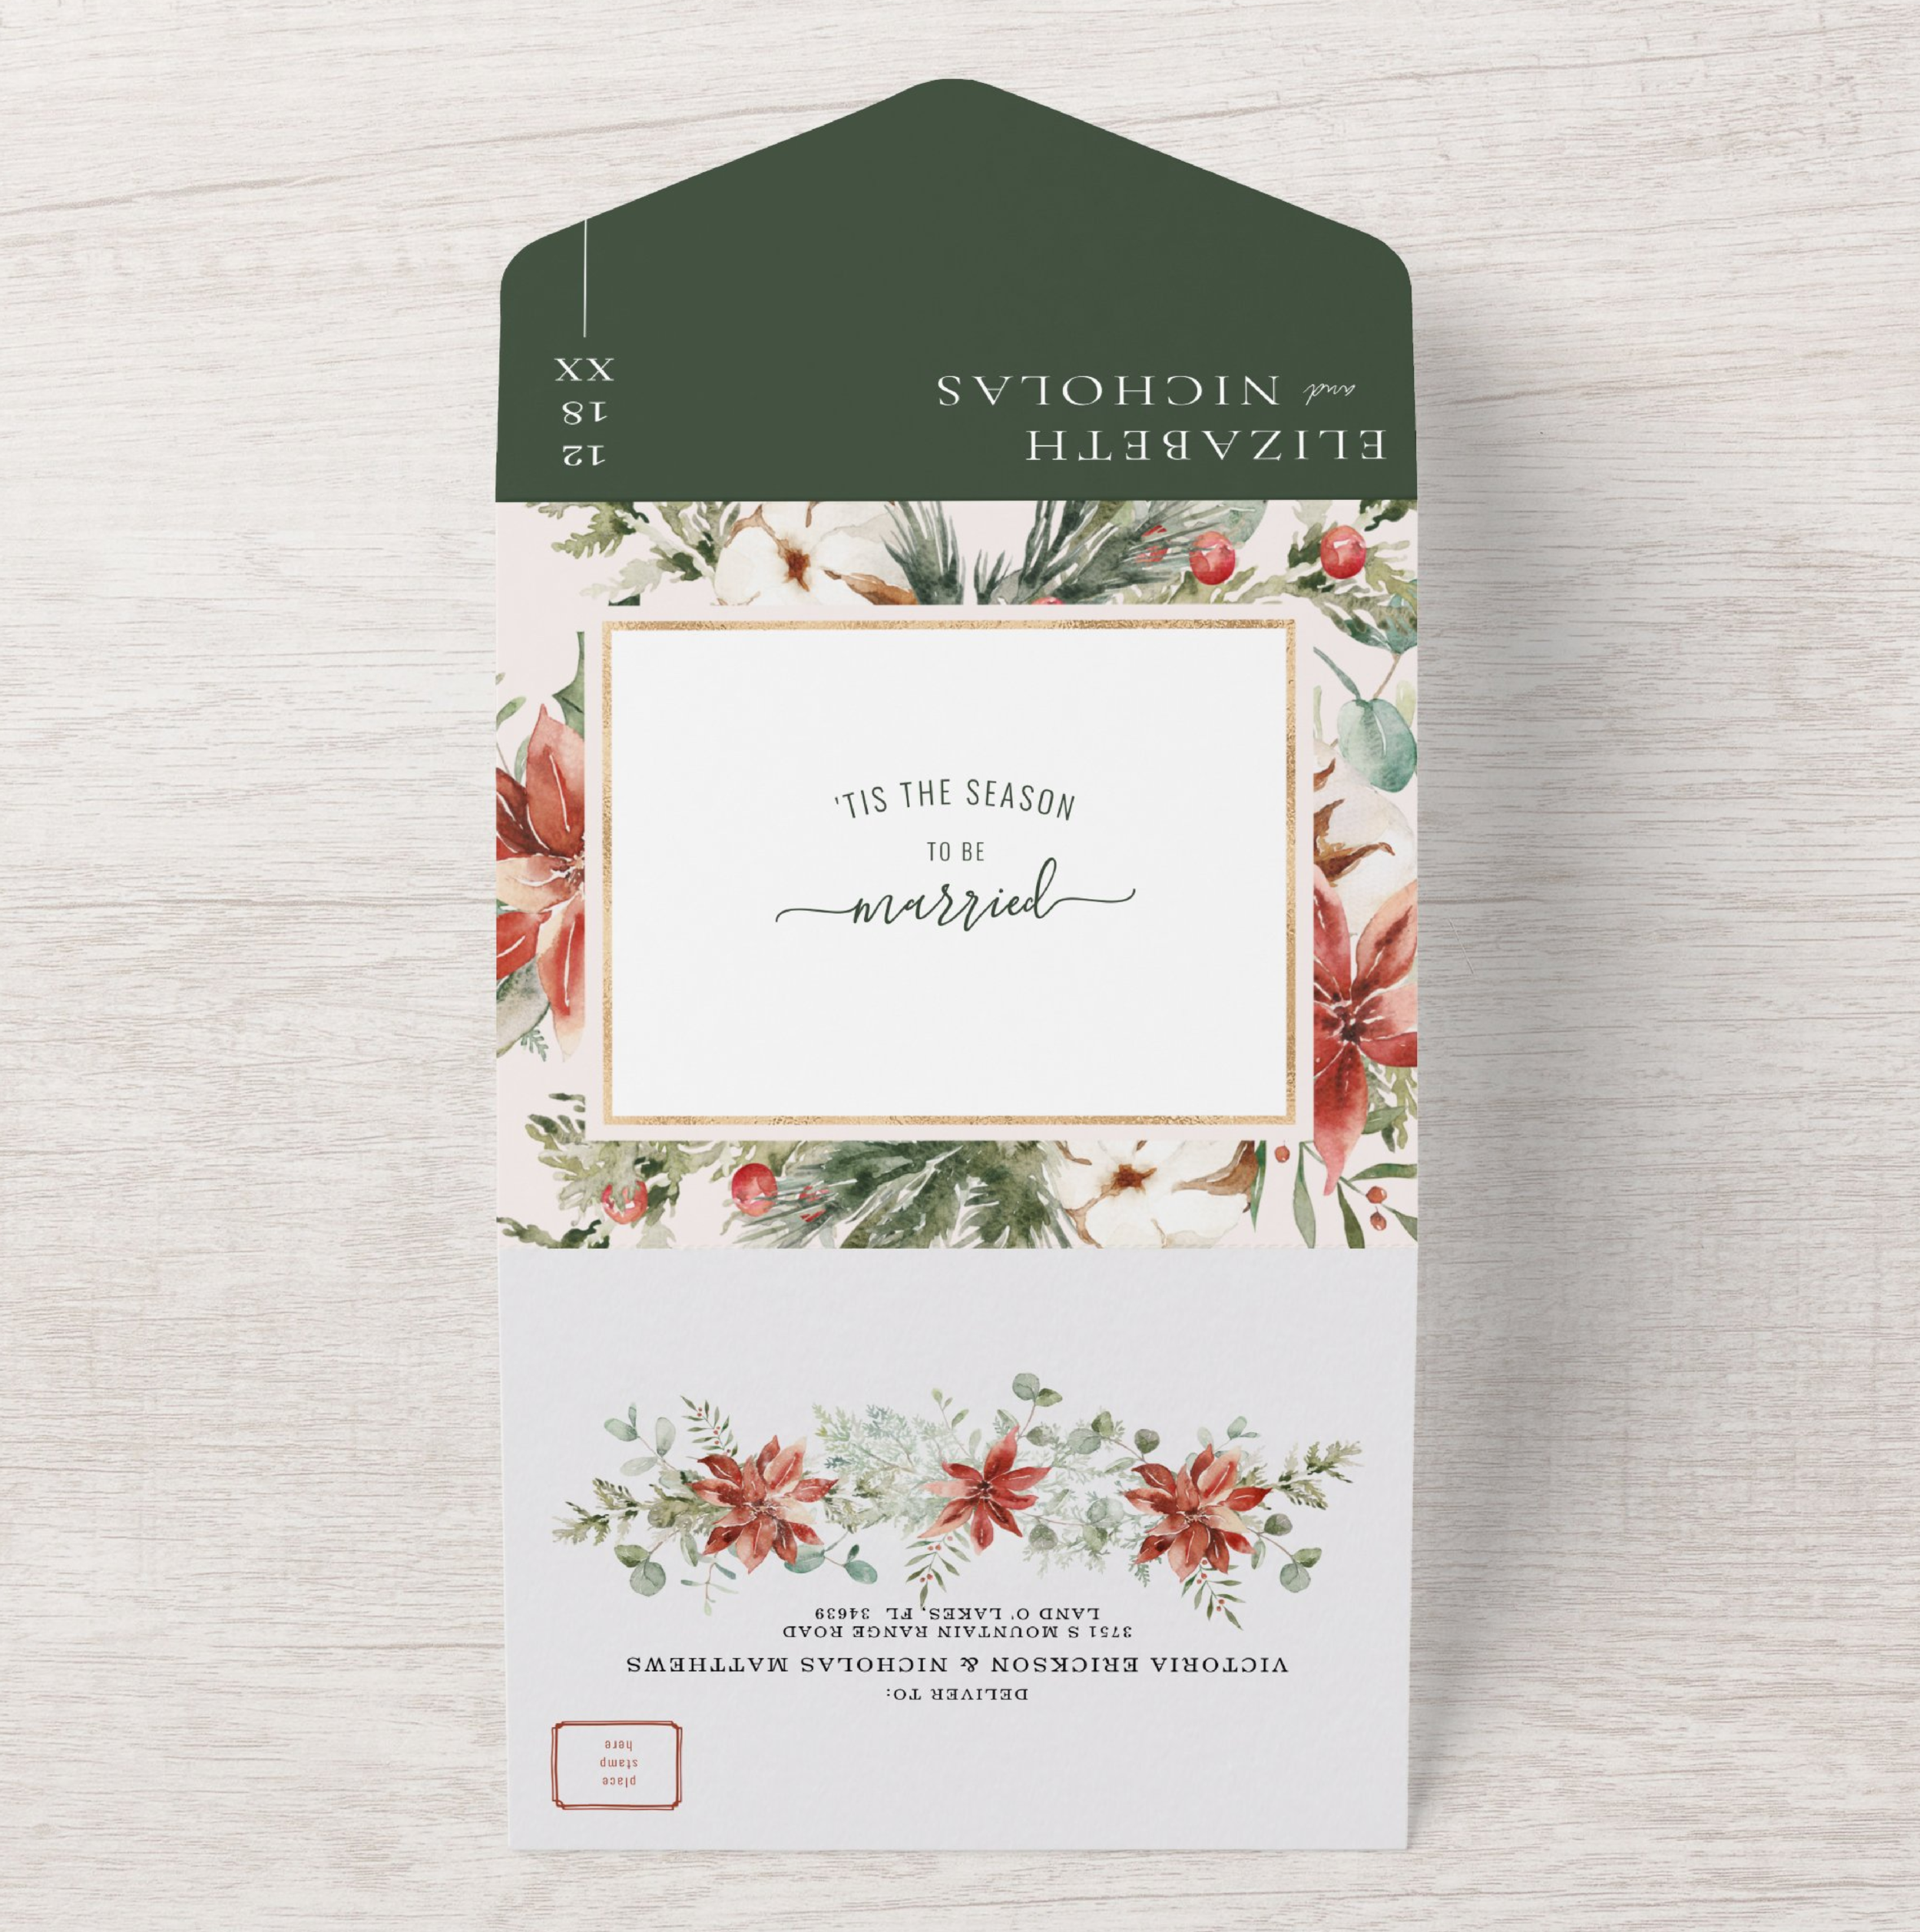 tis_the_season_christmas_wedding_floral_all_in_one_invitation-r3c447a070010465aa1bcc4a7fe497d9b_uunx9_1024.png